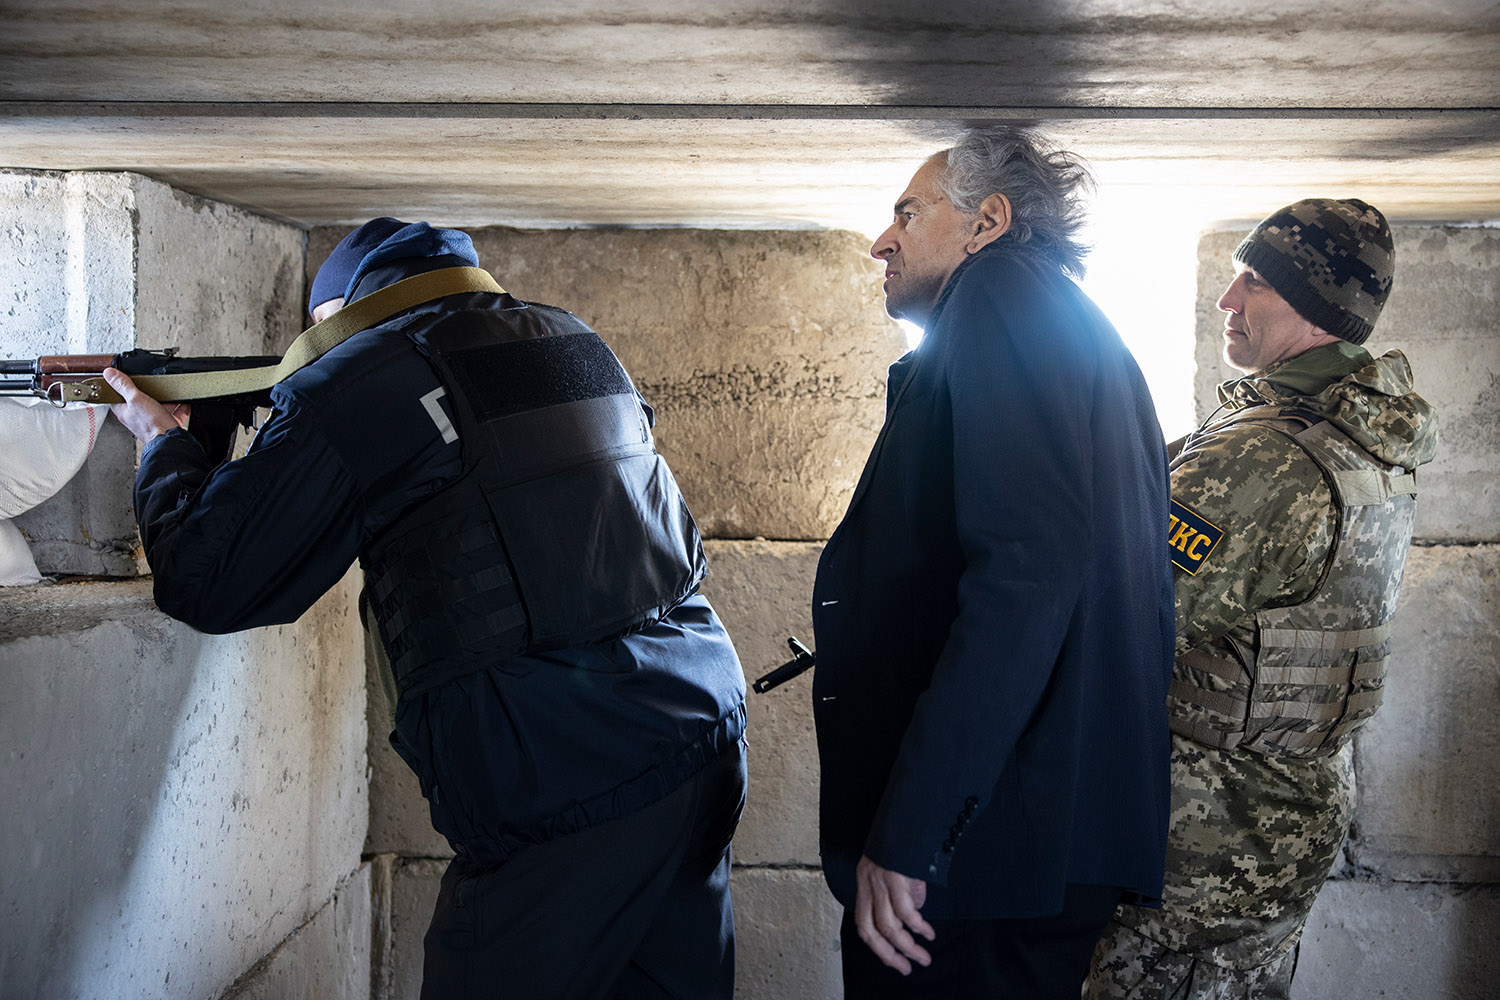 Behind BHL, a military professional. In front of him, a volunteer from the Territorial Defense. As well as the patriotic resistance and armies of citizens. All united against the invader.